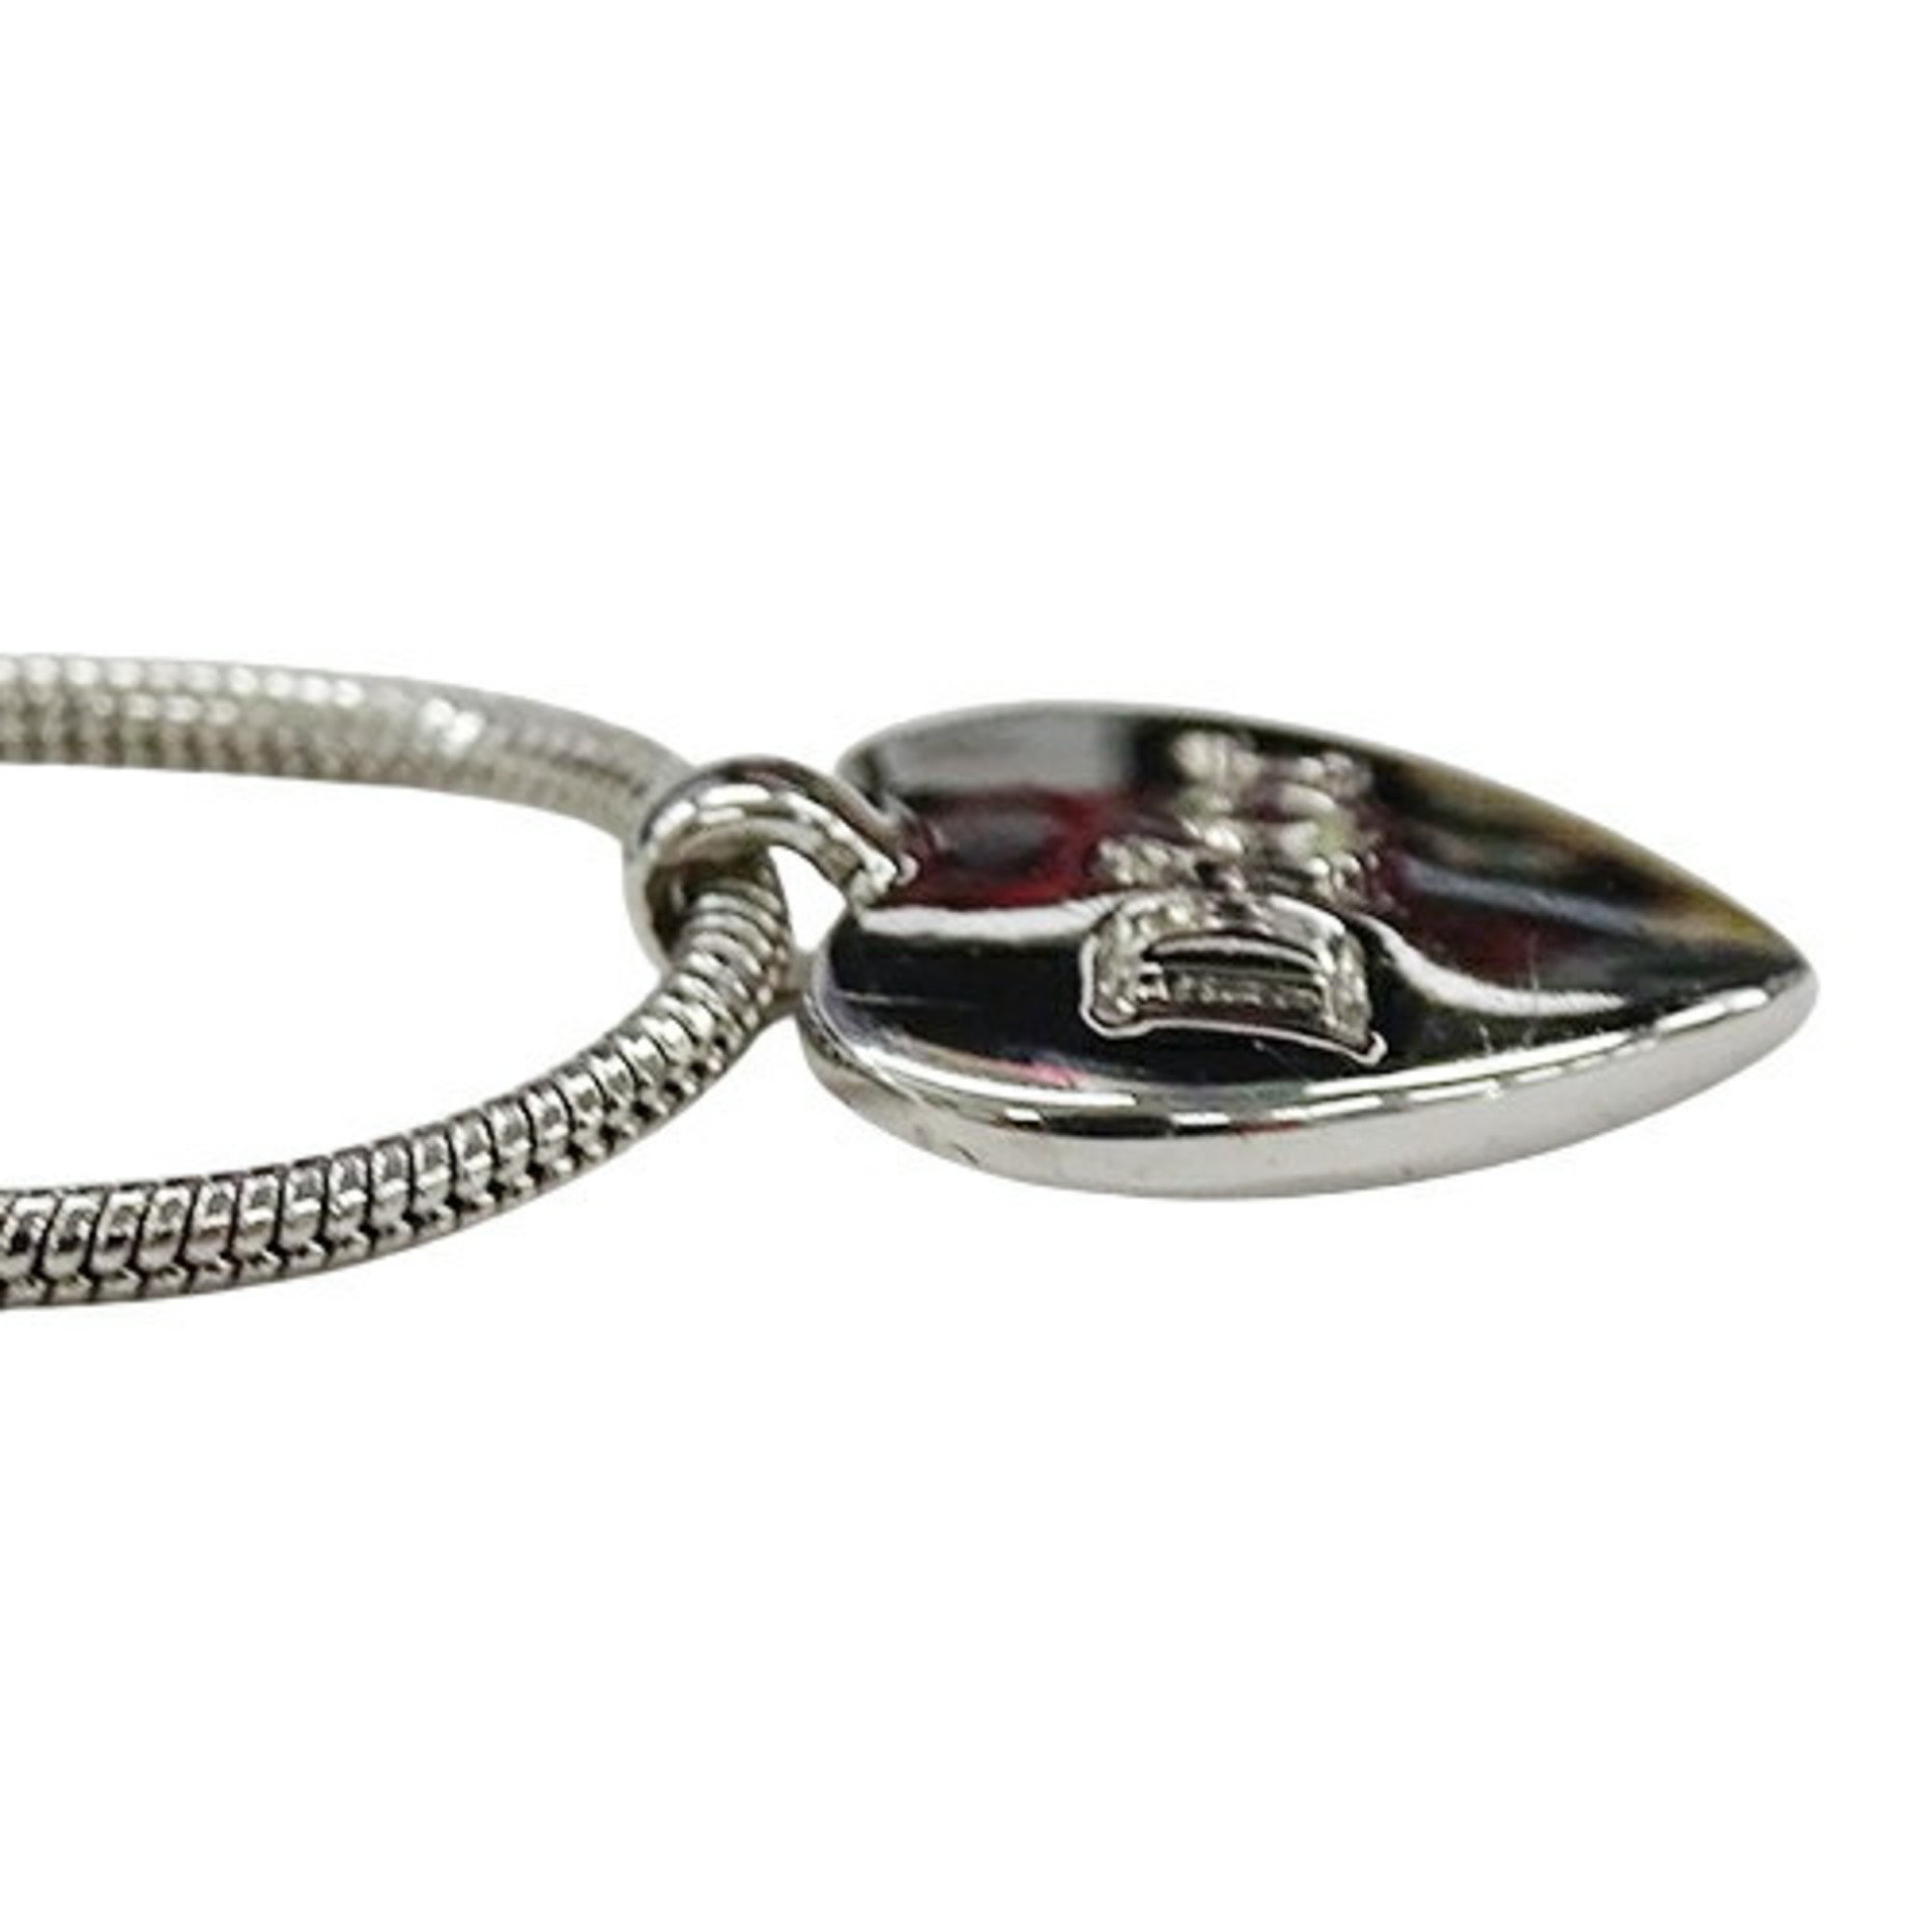 Christian Dior Necklace Women's Brand Heart Silver